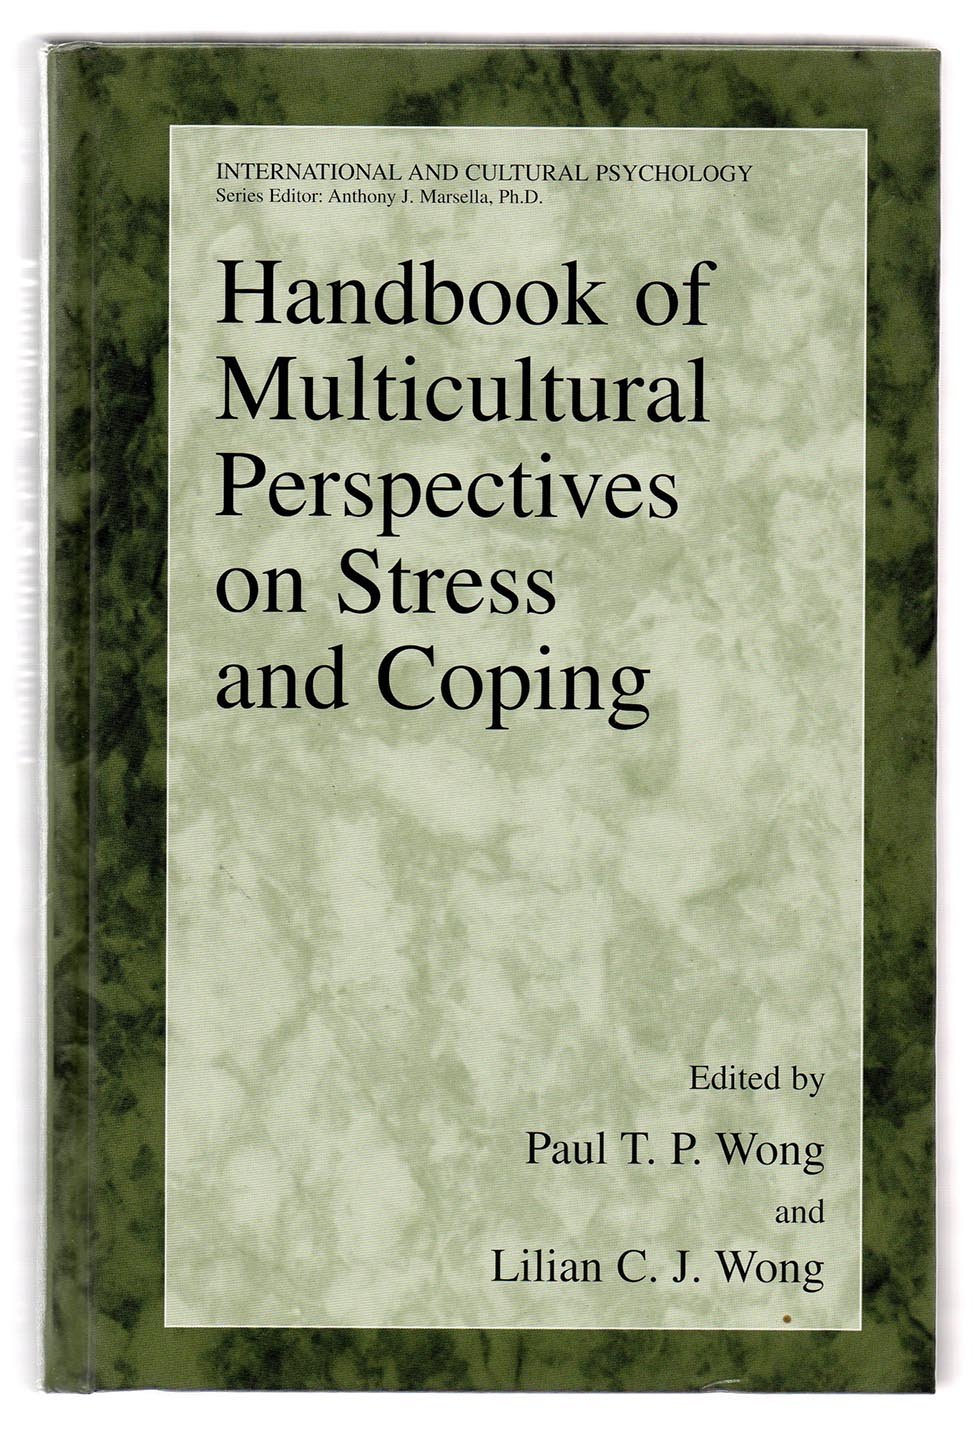 Handbook of Multicultural Perspectives on Stress and Coping